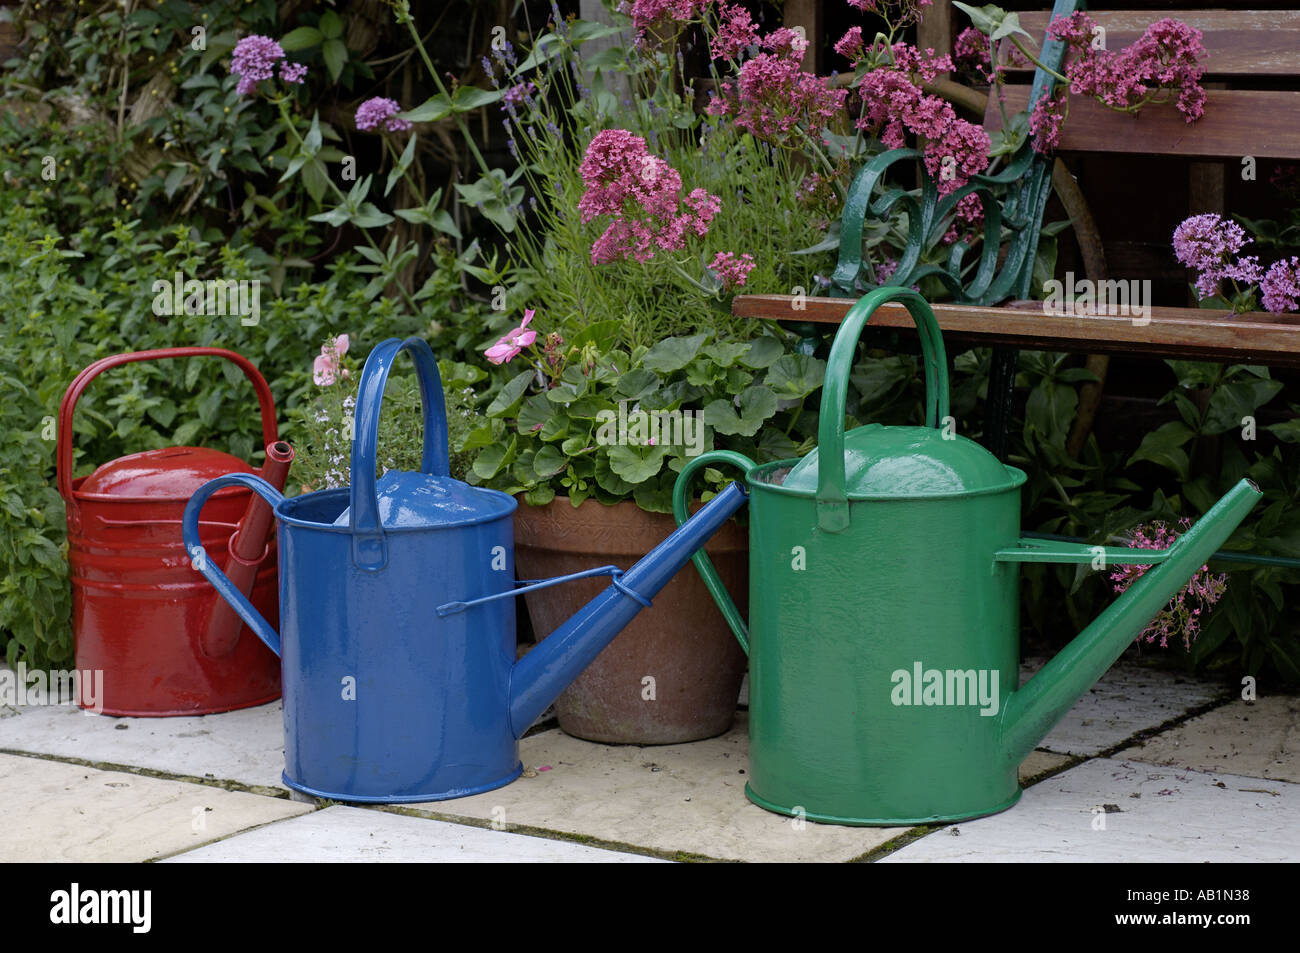 Colourful brightly painted red green blue watering cans Stock Photo